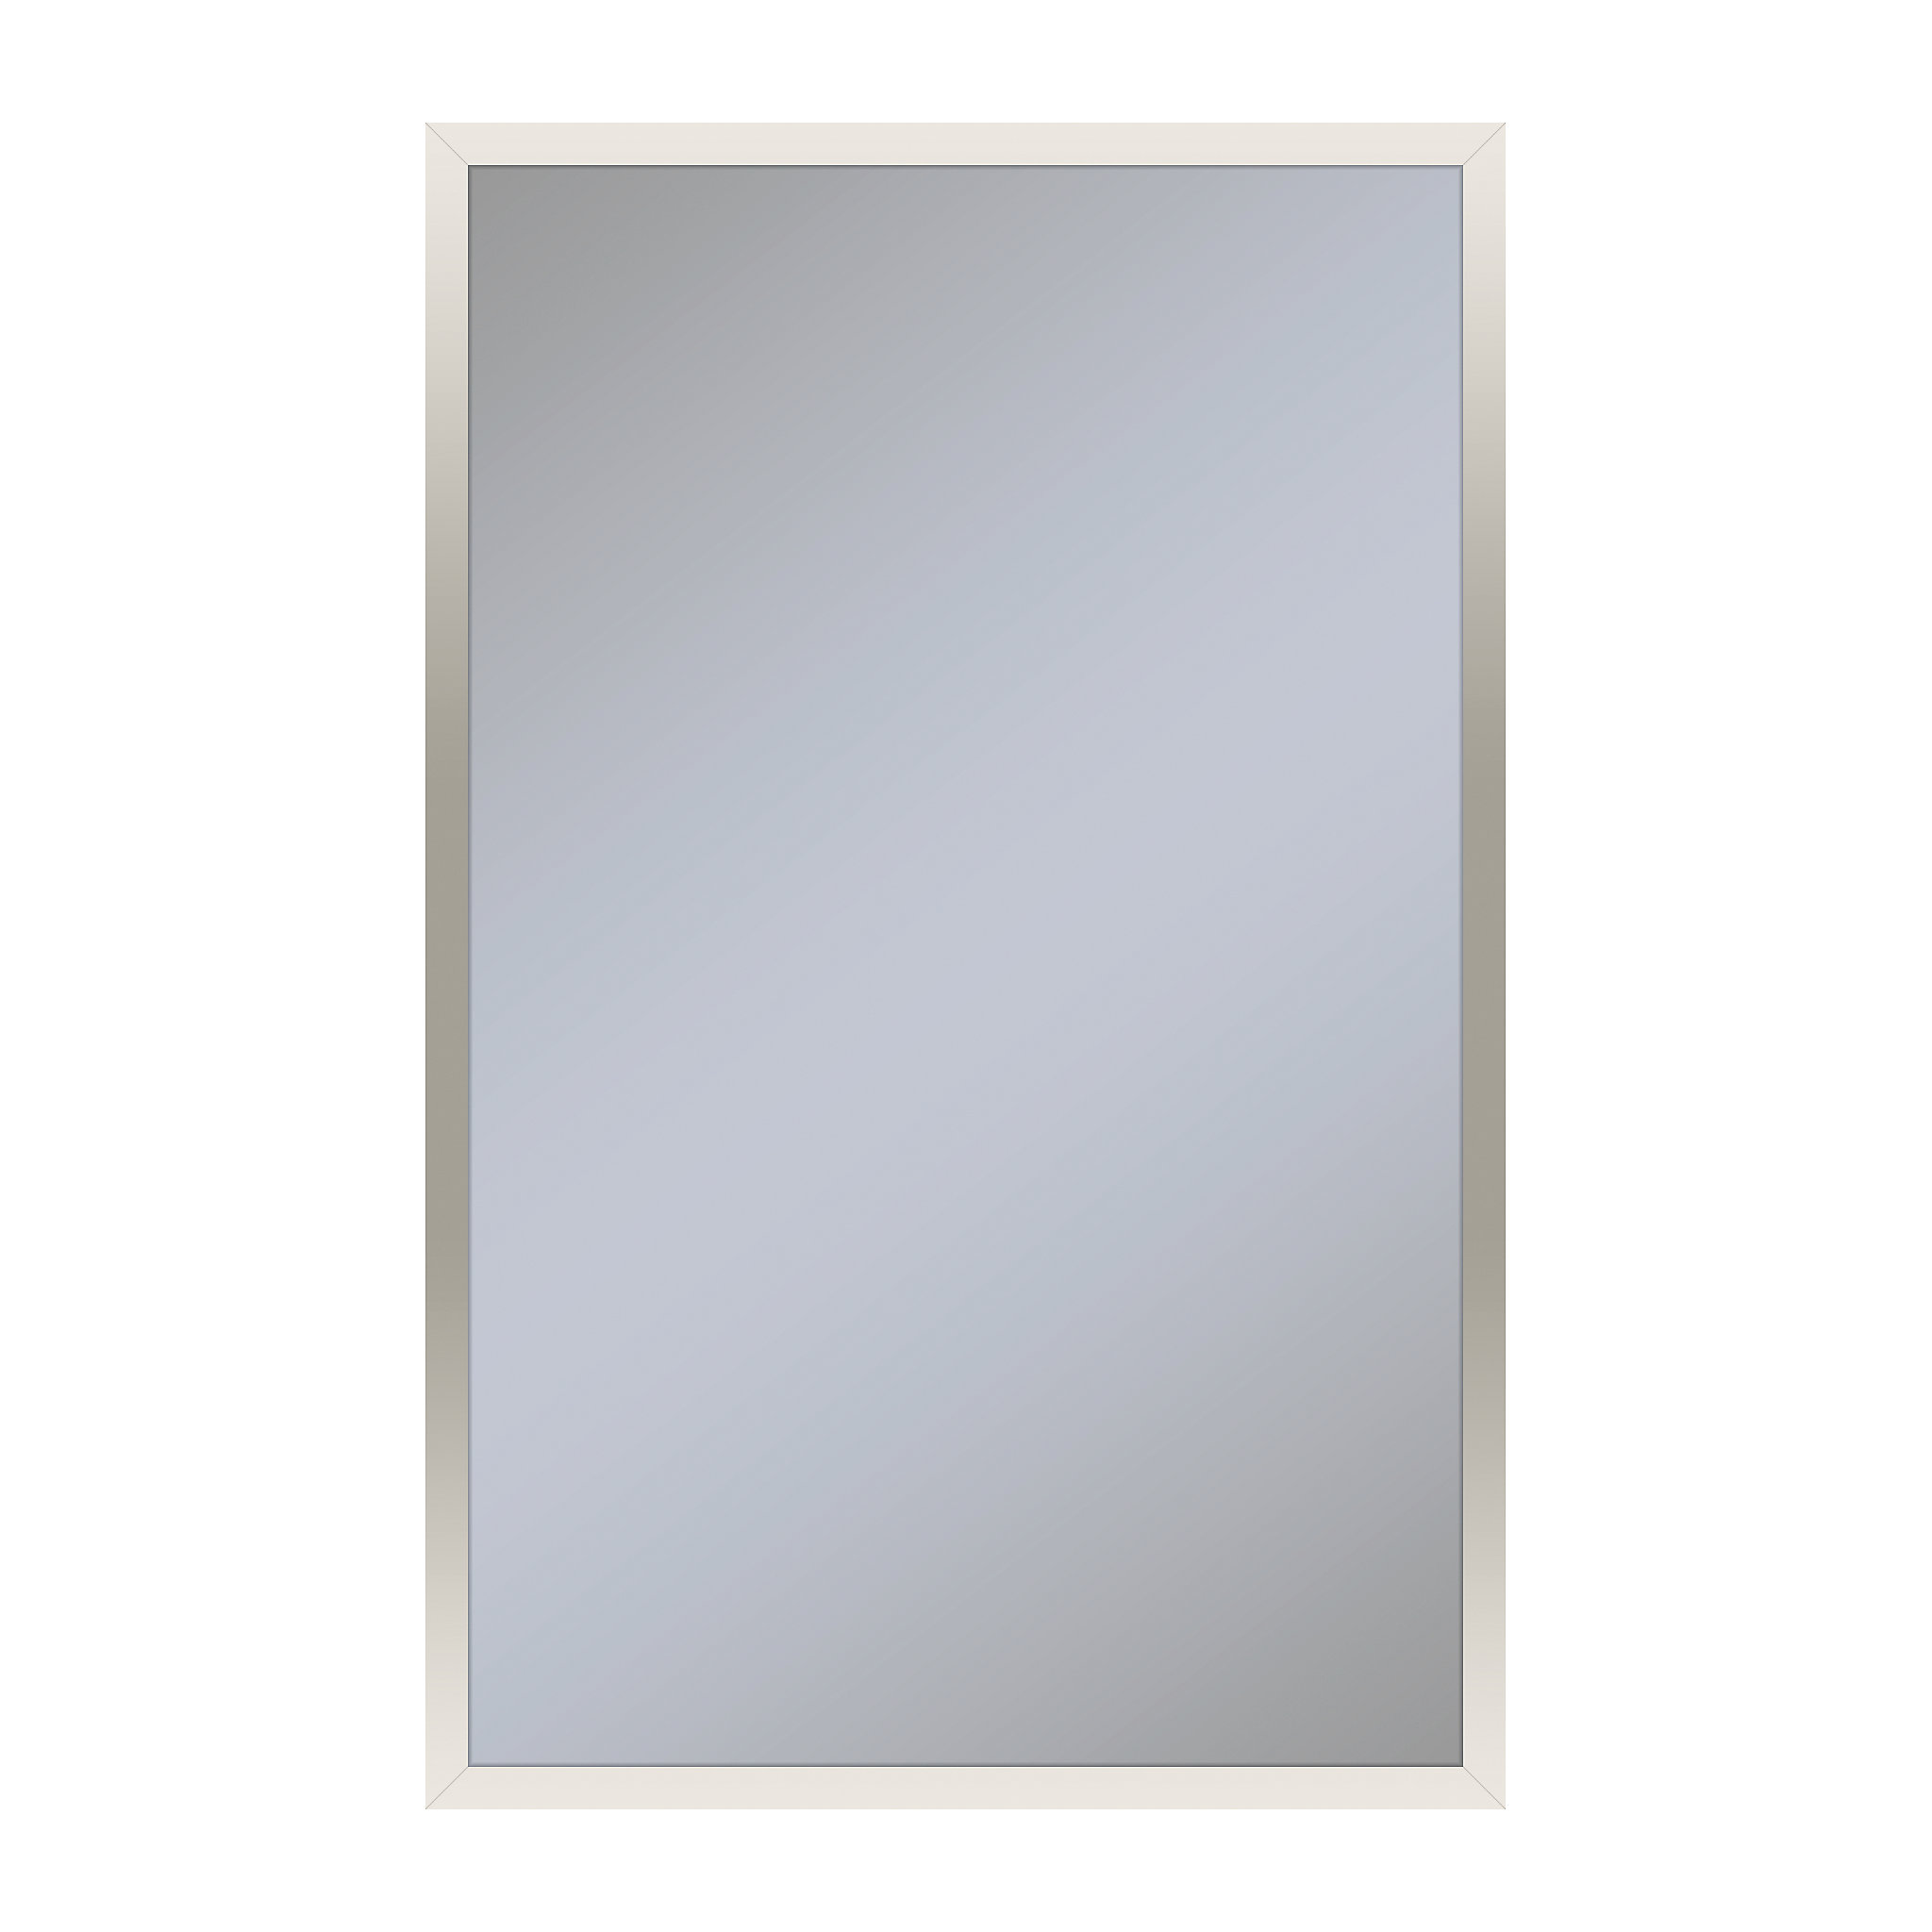 Robern PC2030D6TNN77 Profiles Framed Cabinet, 20" x 30" x 6", Polished Nickel, Non-Electric, Reversible Hinge